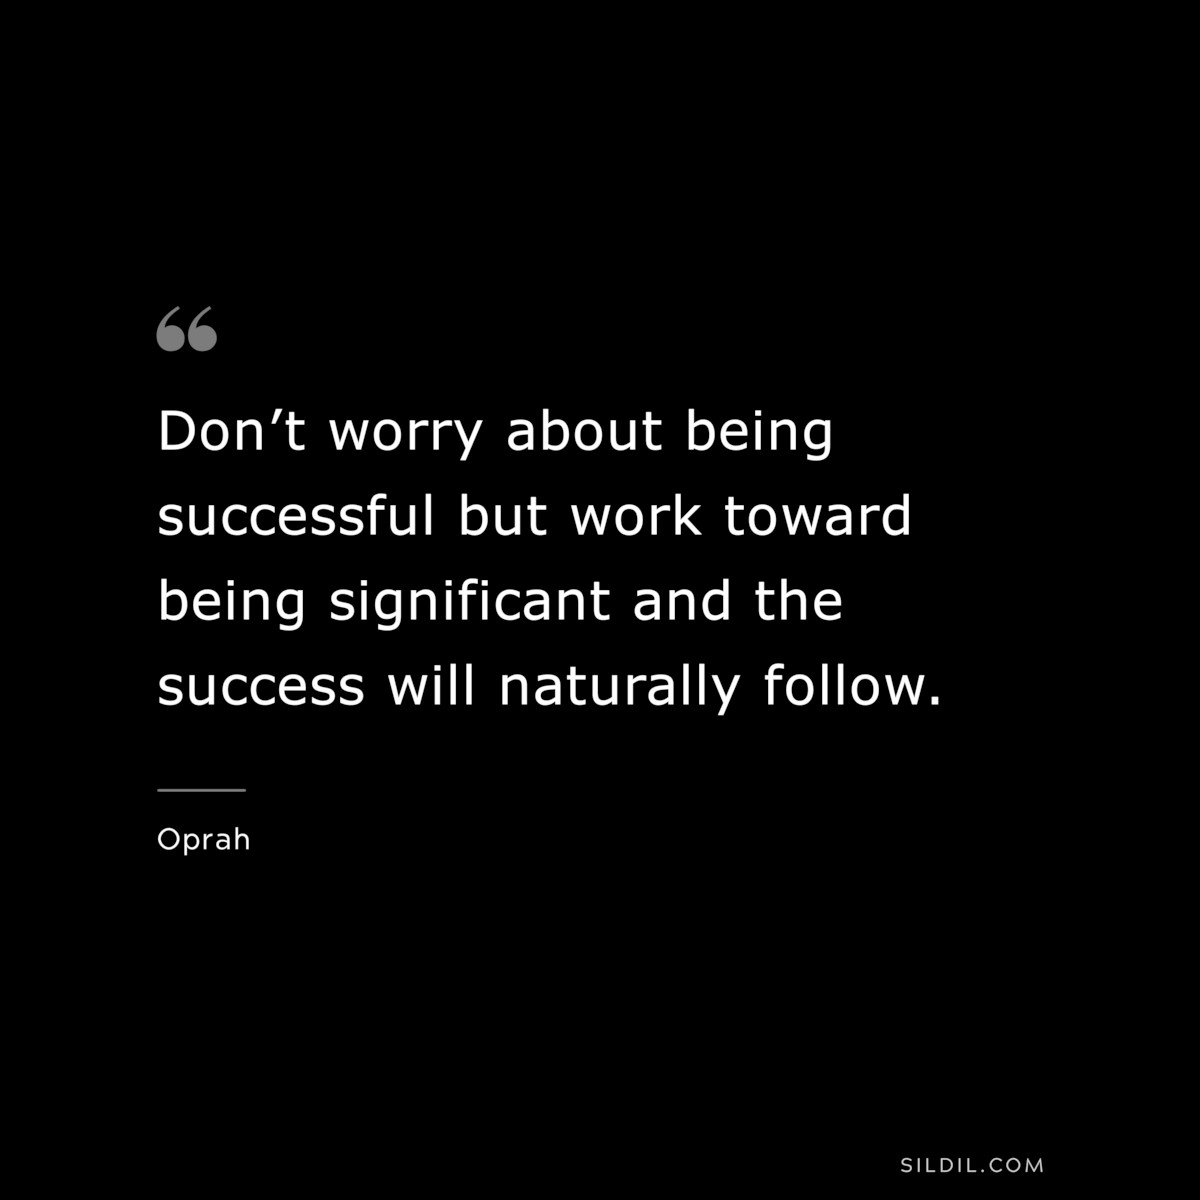 Don’t worry about being successful but work toward being significant and the success will naturally follow. ― Oprah